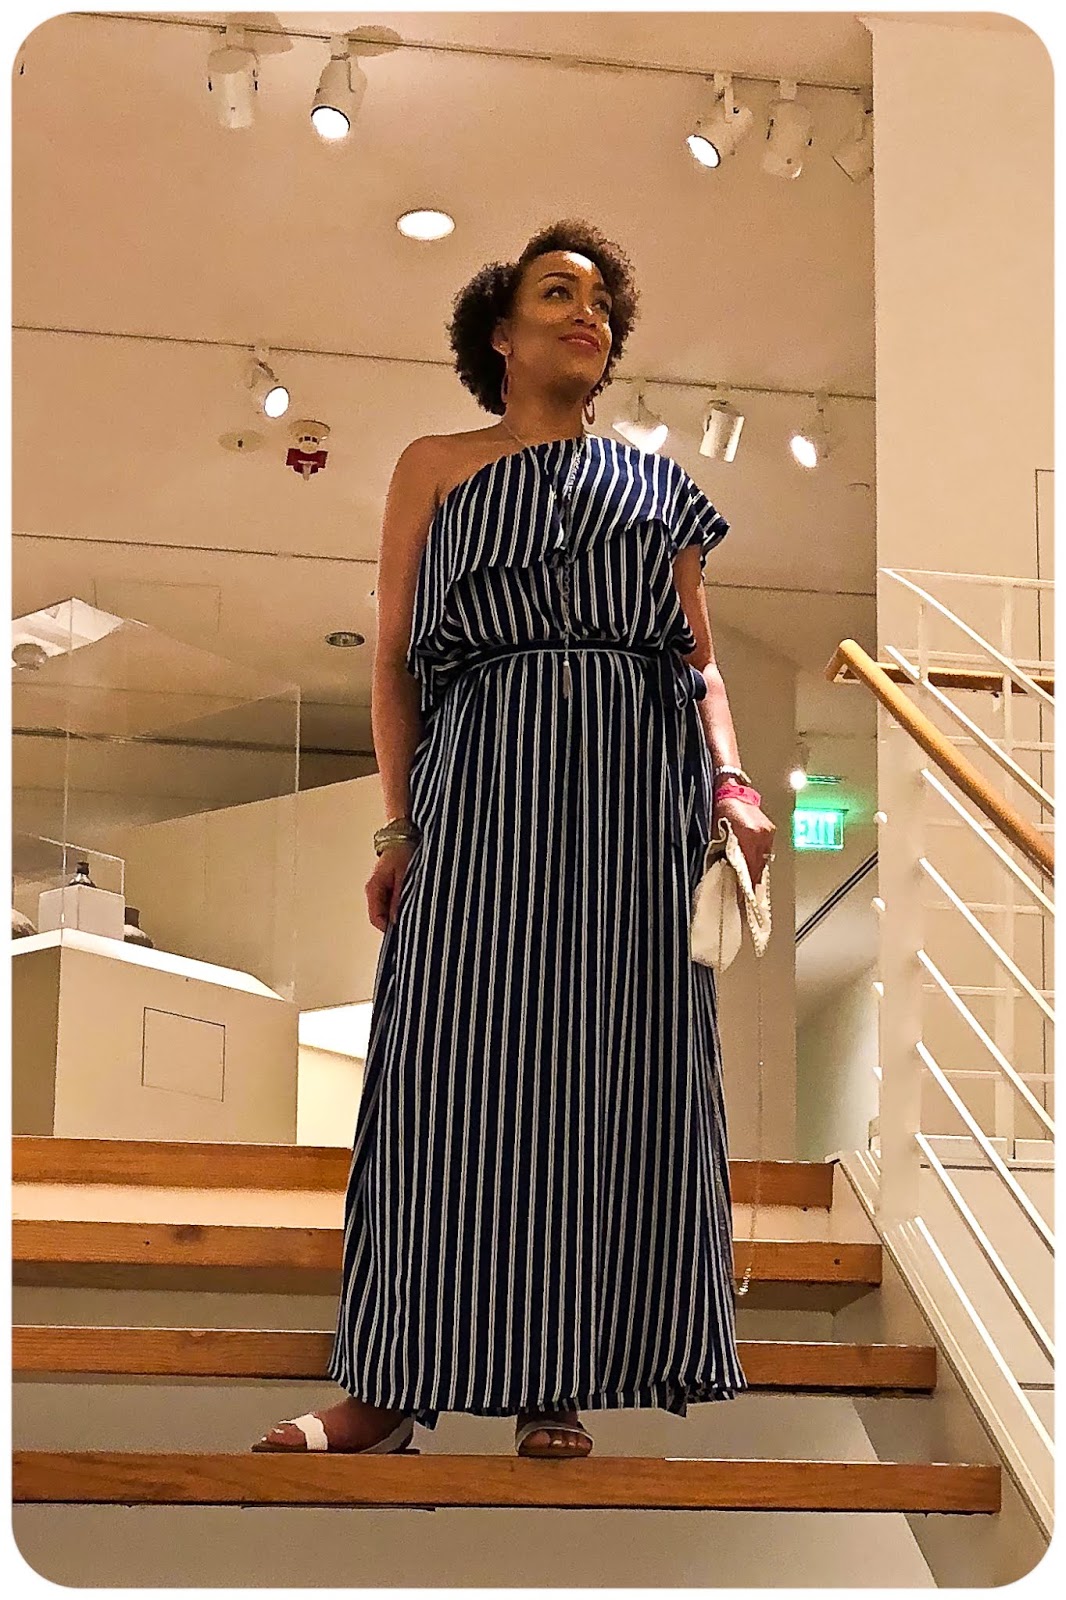 Vogue 9318 - One-Shoulder Top with Matching Maxi Wrap Skirt - Erica Bunker DIY Style!